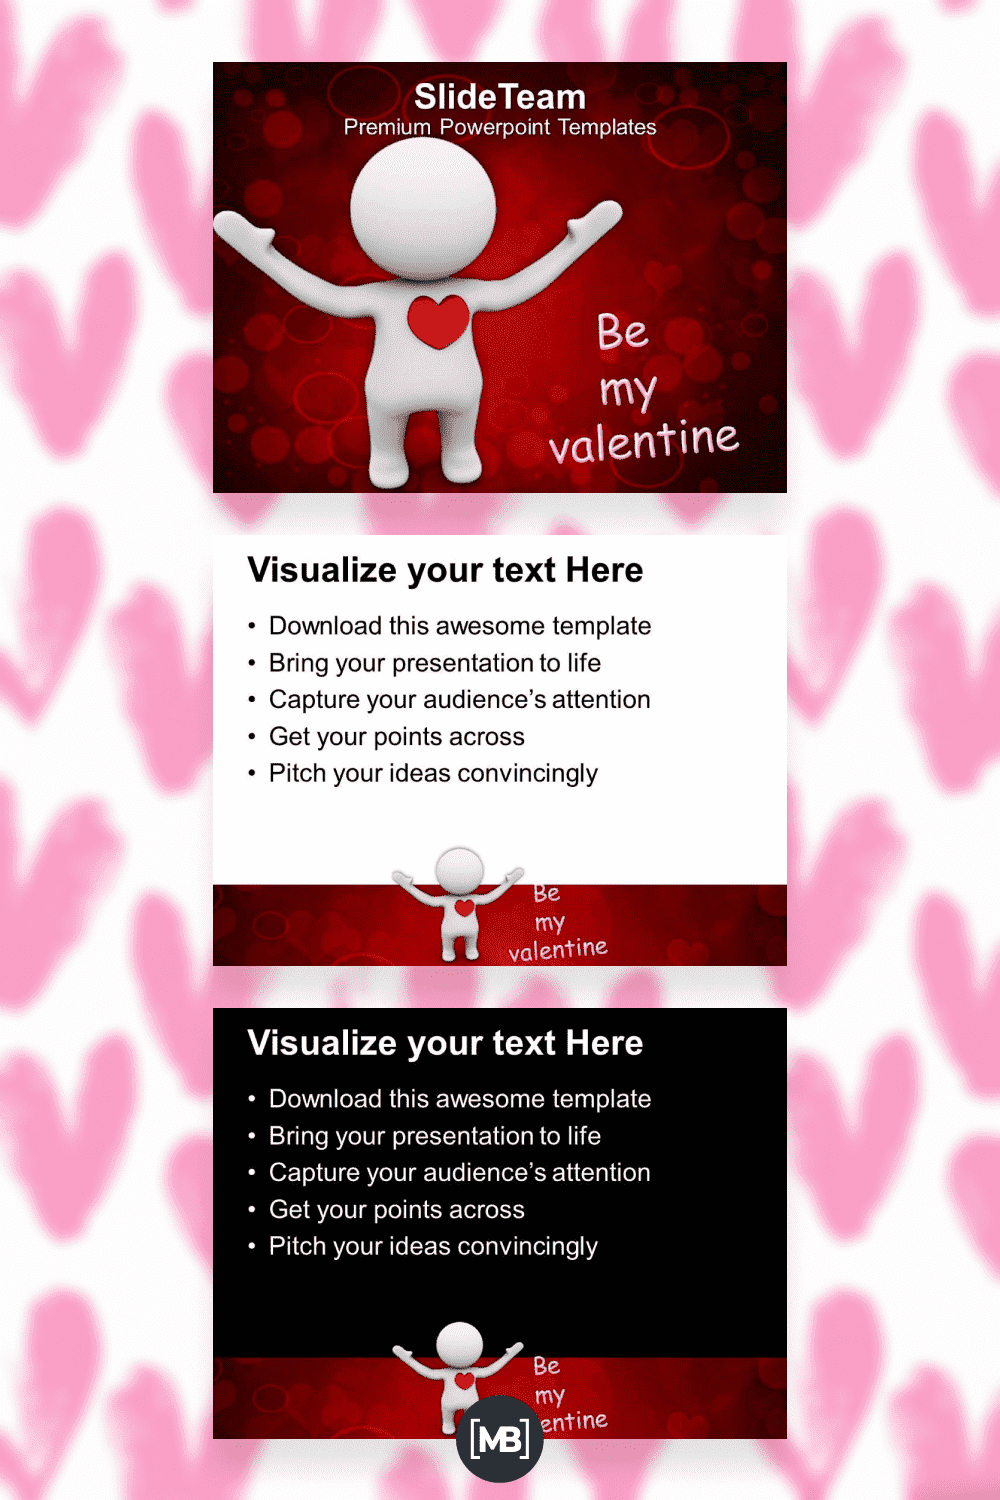 Be my valentine symbol of love powerpoint templates.